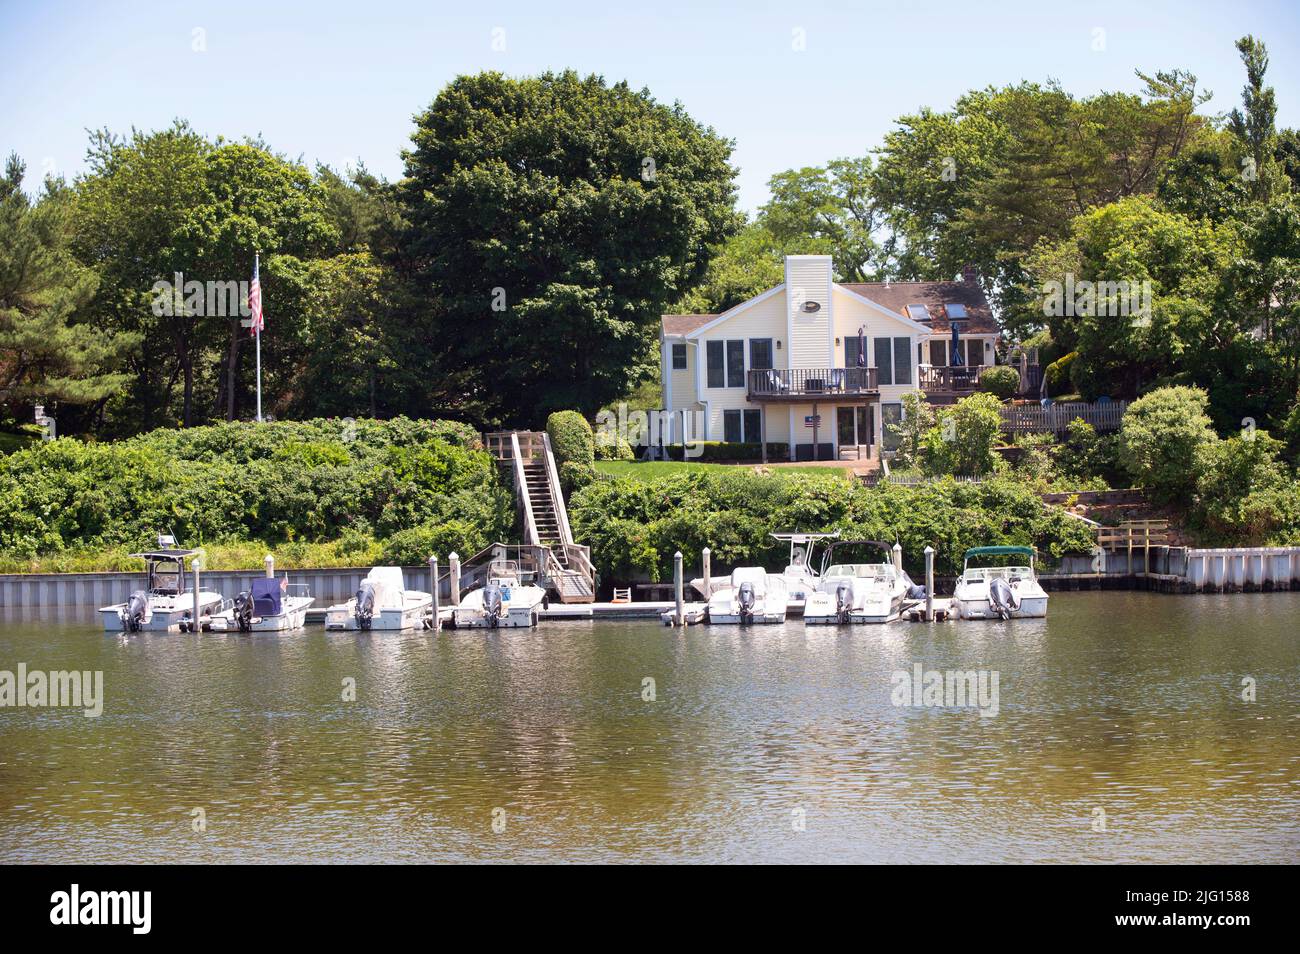 A home and docks along the Bass River in Dennis, Massachusetts on Cape Cod, USA Stock Photo